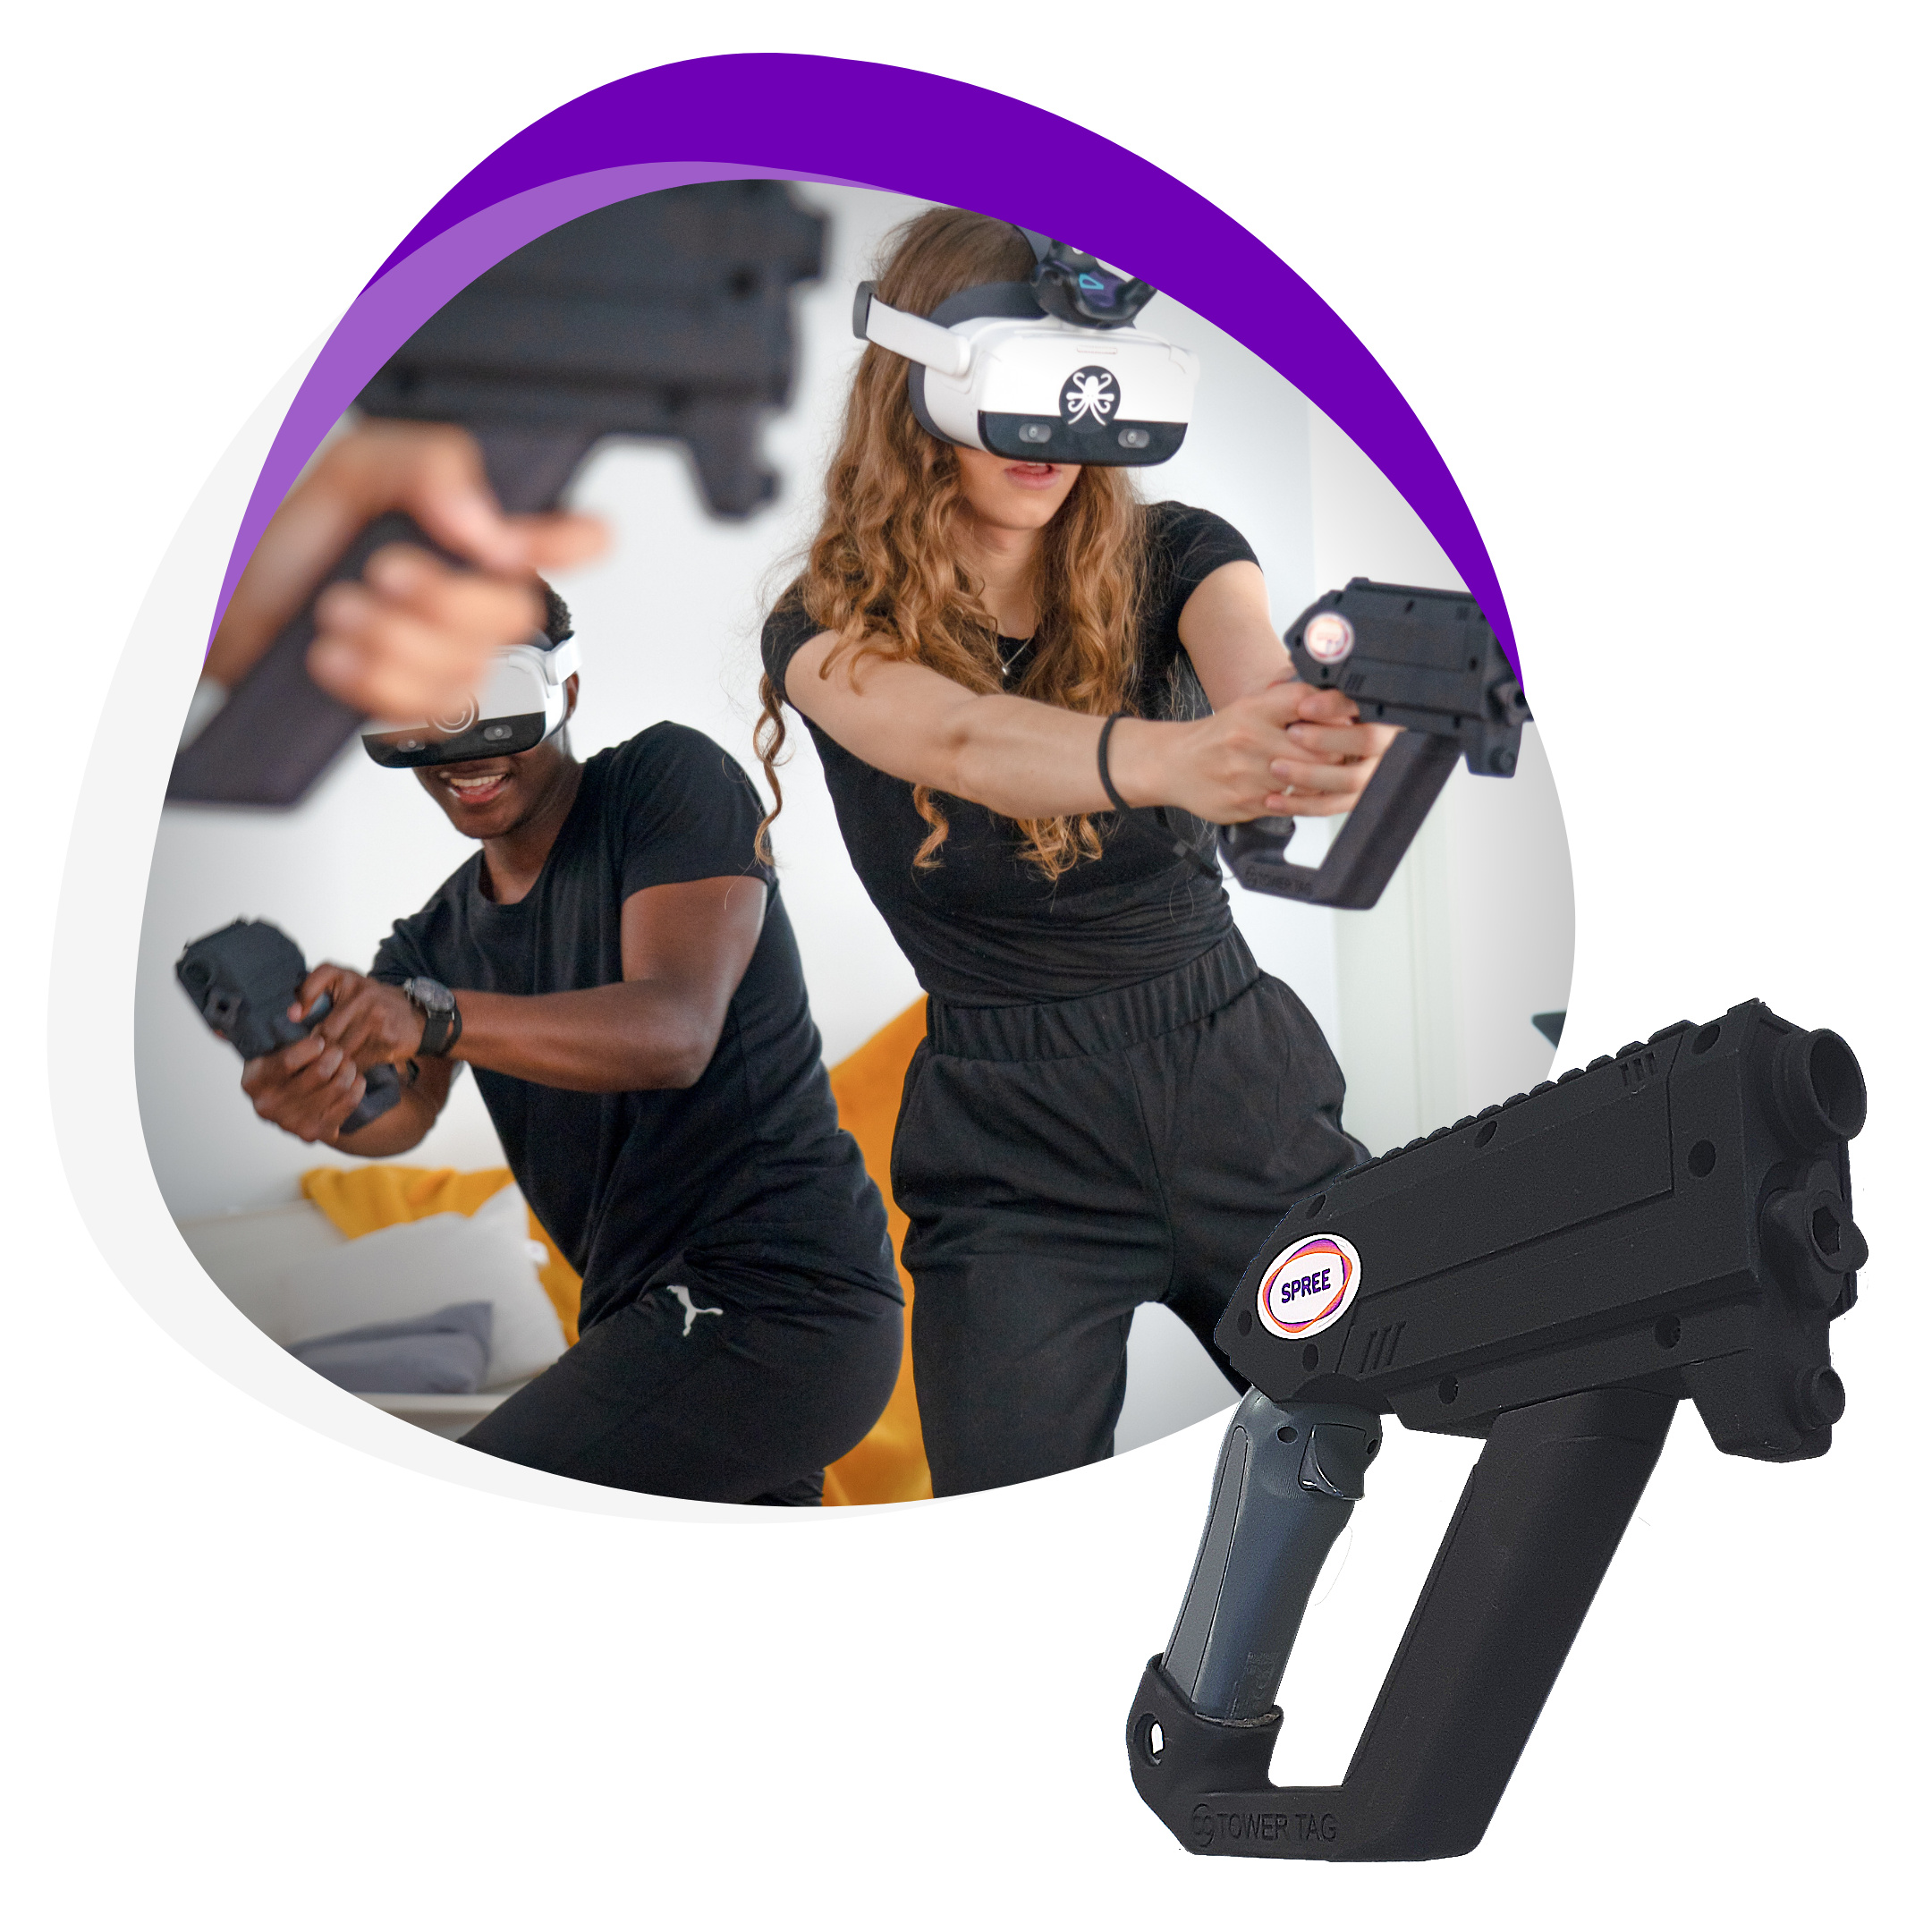 Laser Tag: A recreational shooting sport in virtual reality, Light guns. 2160x2160 HD Background.